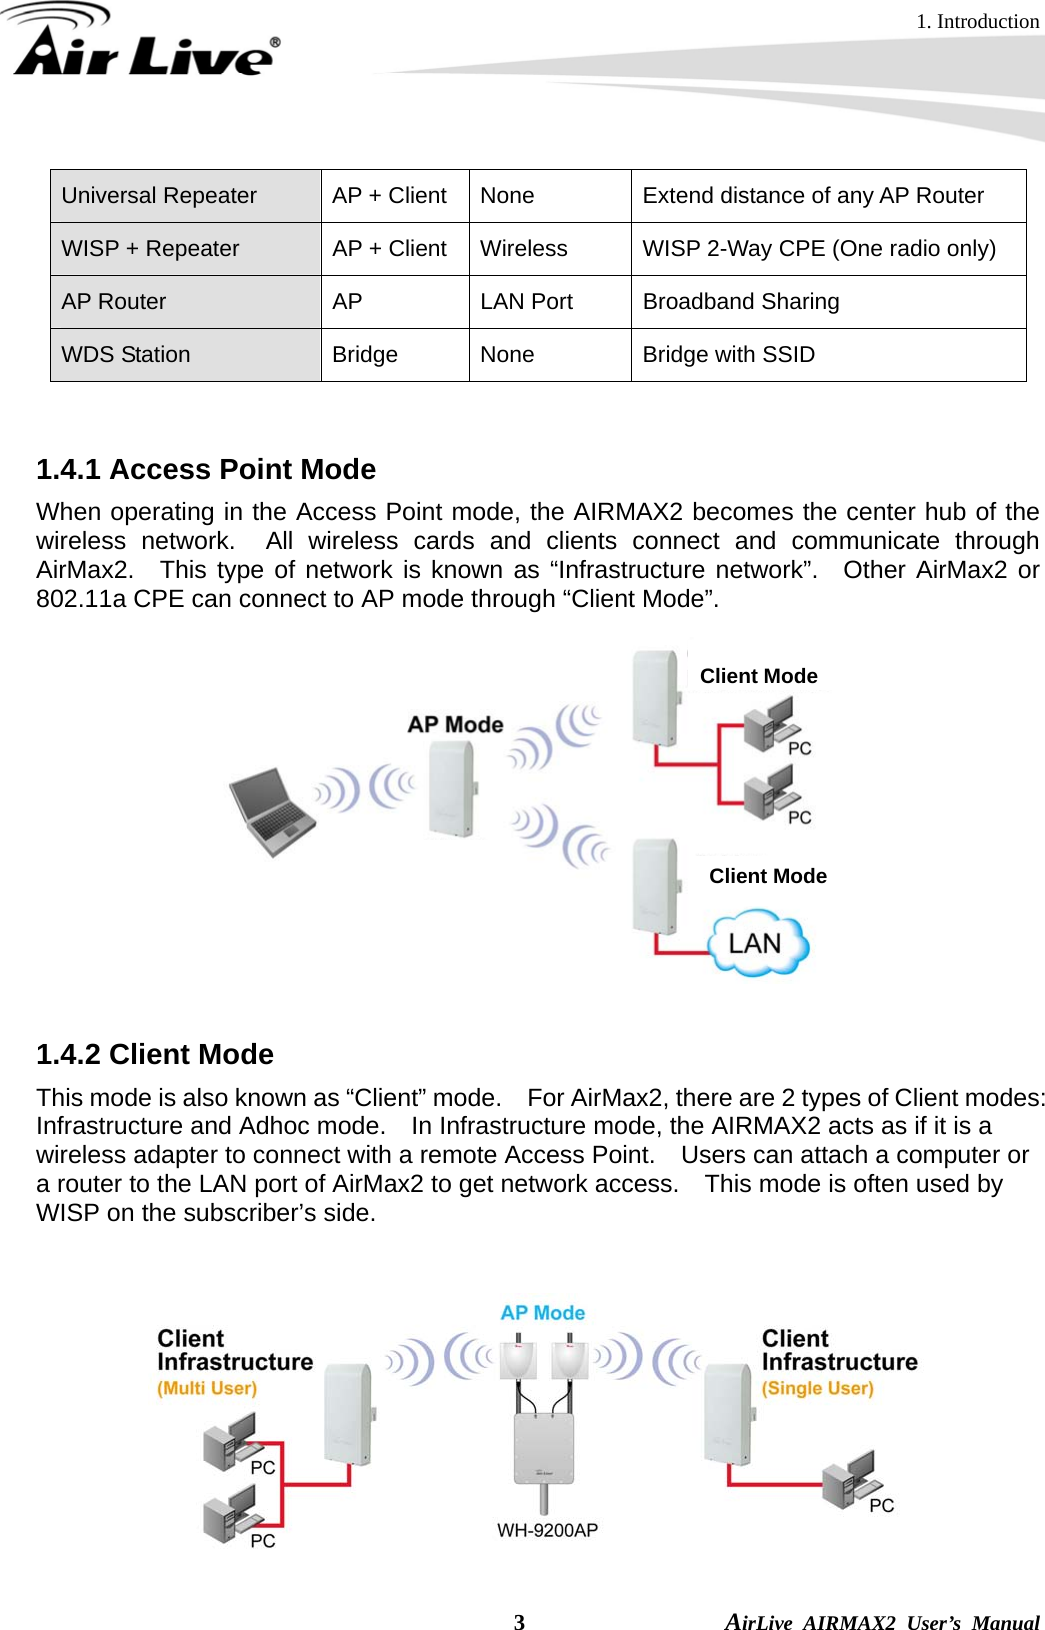 1. Introduction  3                AirLive AIRMAX2 User’s Manual Universal Repeater  AP + Client  None  Extend distance of any AP Router WISP + Repeater  AP + Client  Wireless  WISP 2-Way CPE (One radio only) AP Router  AP  LAN Port  Broadband Sharing WDS Station  Bridge  None  Bridge with SSID   1.4.1 Access Point Mode When operating in the Access Point mode, the AIRMAX2 becomes the center hub of the wireless network.  All wireless cards and clients connect and communicate through AirMax2.  This type of network is known as “Infrastructure network”.  Other AirMax2 or 802.11a CPE can connect to AP mode through “Client Mode”.       1.4.2 Client Mode This mode is also known as “Client” mode.    For AirMax2, there are 2 types of Client modes: Infrastructure and Adhoc mode.    In Infrastructure mode, the AIRMAX2 acts as if it is a wireless adapter to connect with a remote Access Point.    Users can attach a computer or a router to the LAN port of AirMax2 to get network access.    This mode is often used by WISP on the subscriber’s side.       Client Mode Client Mode 